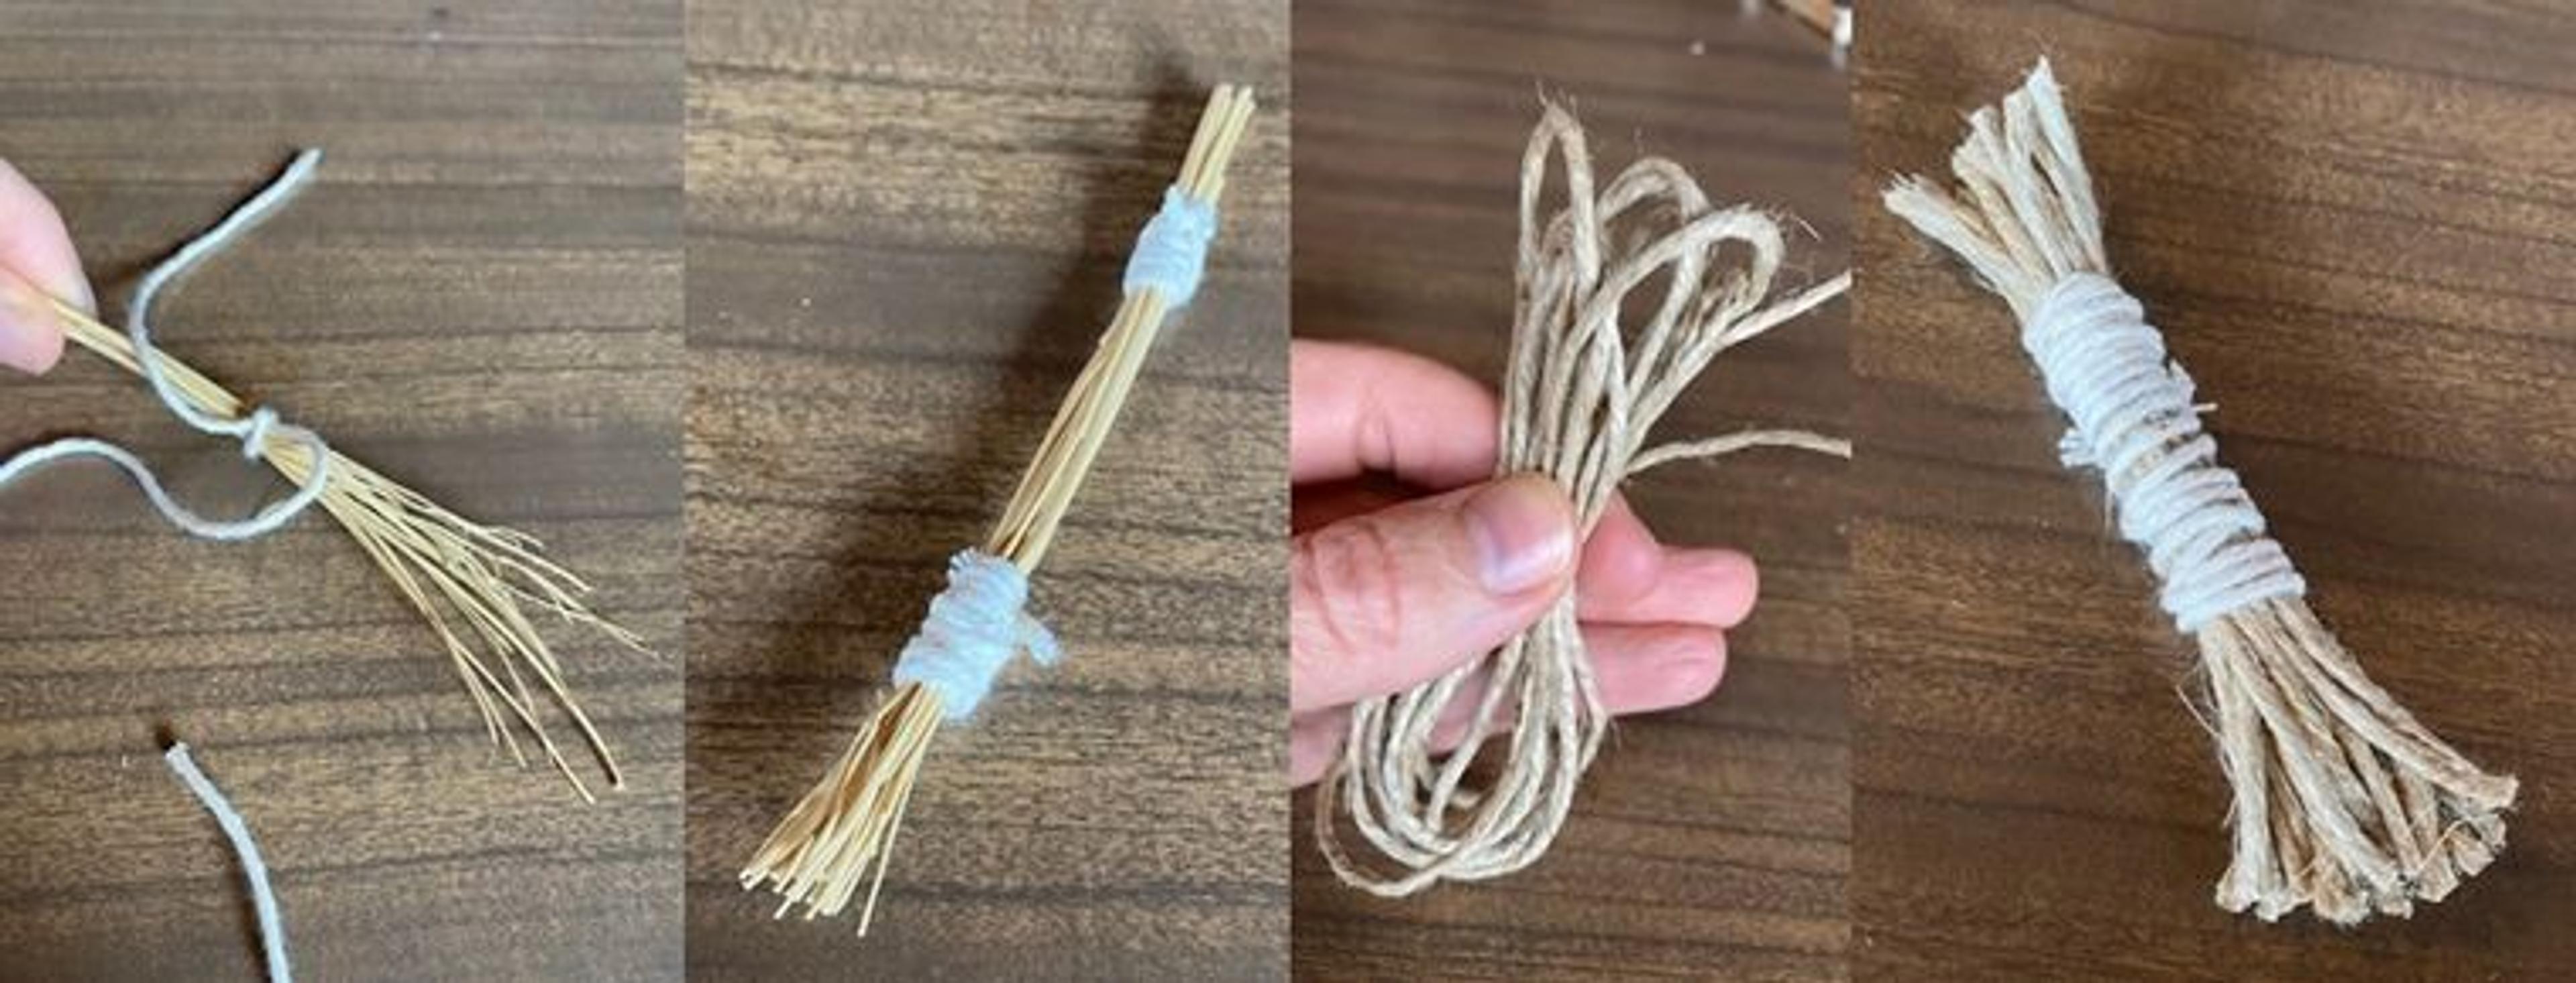 Four small side-by-side images of sticks being bundled together with thread.